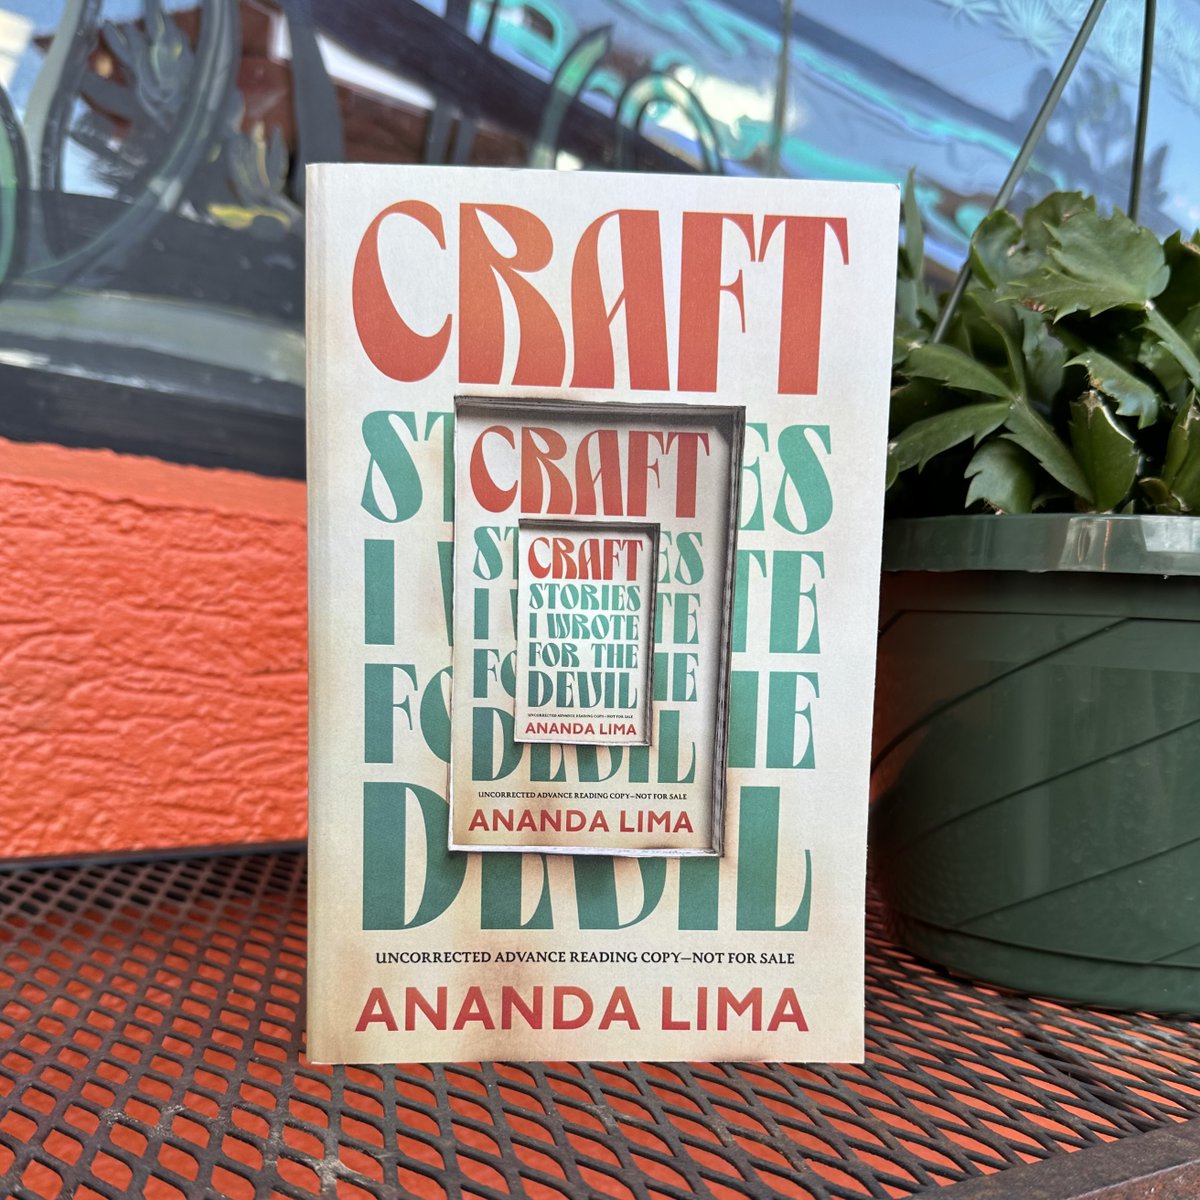 A one-night stand with the devil at a Halloween party back in 1999 leads to a lifetime of surreal encounters in #Craft: Stories I Wrote for the Devil – an intoxicating and surreal fiction debut by award-winning author @anandalima. Out on 6/18! 📚✨ bit.ly/4cFJSgE